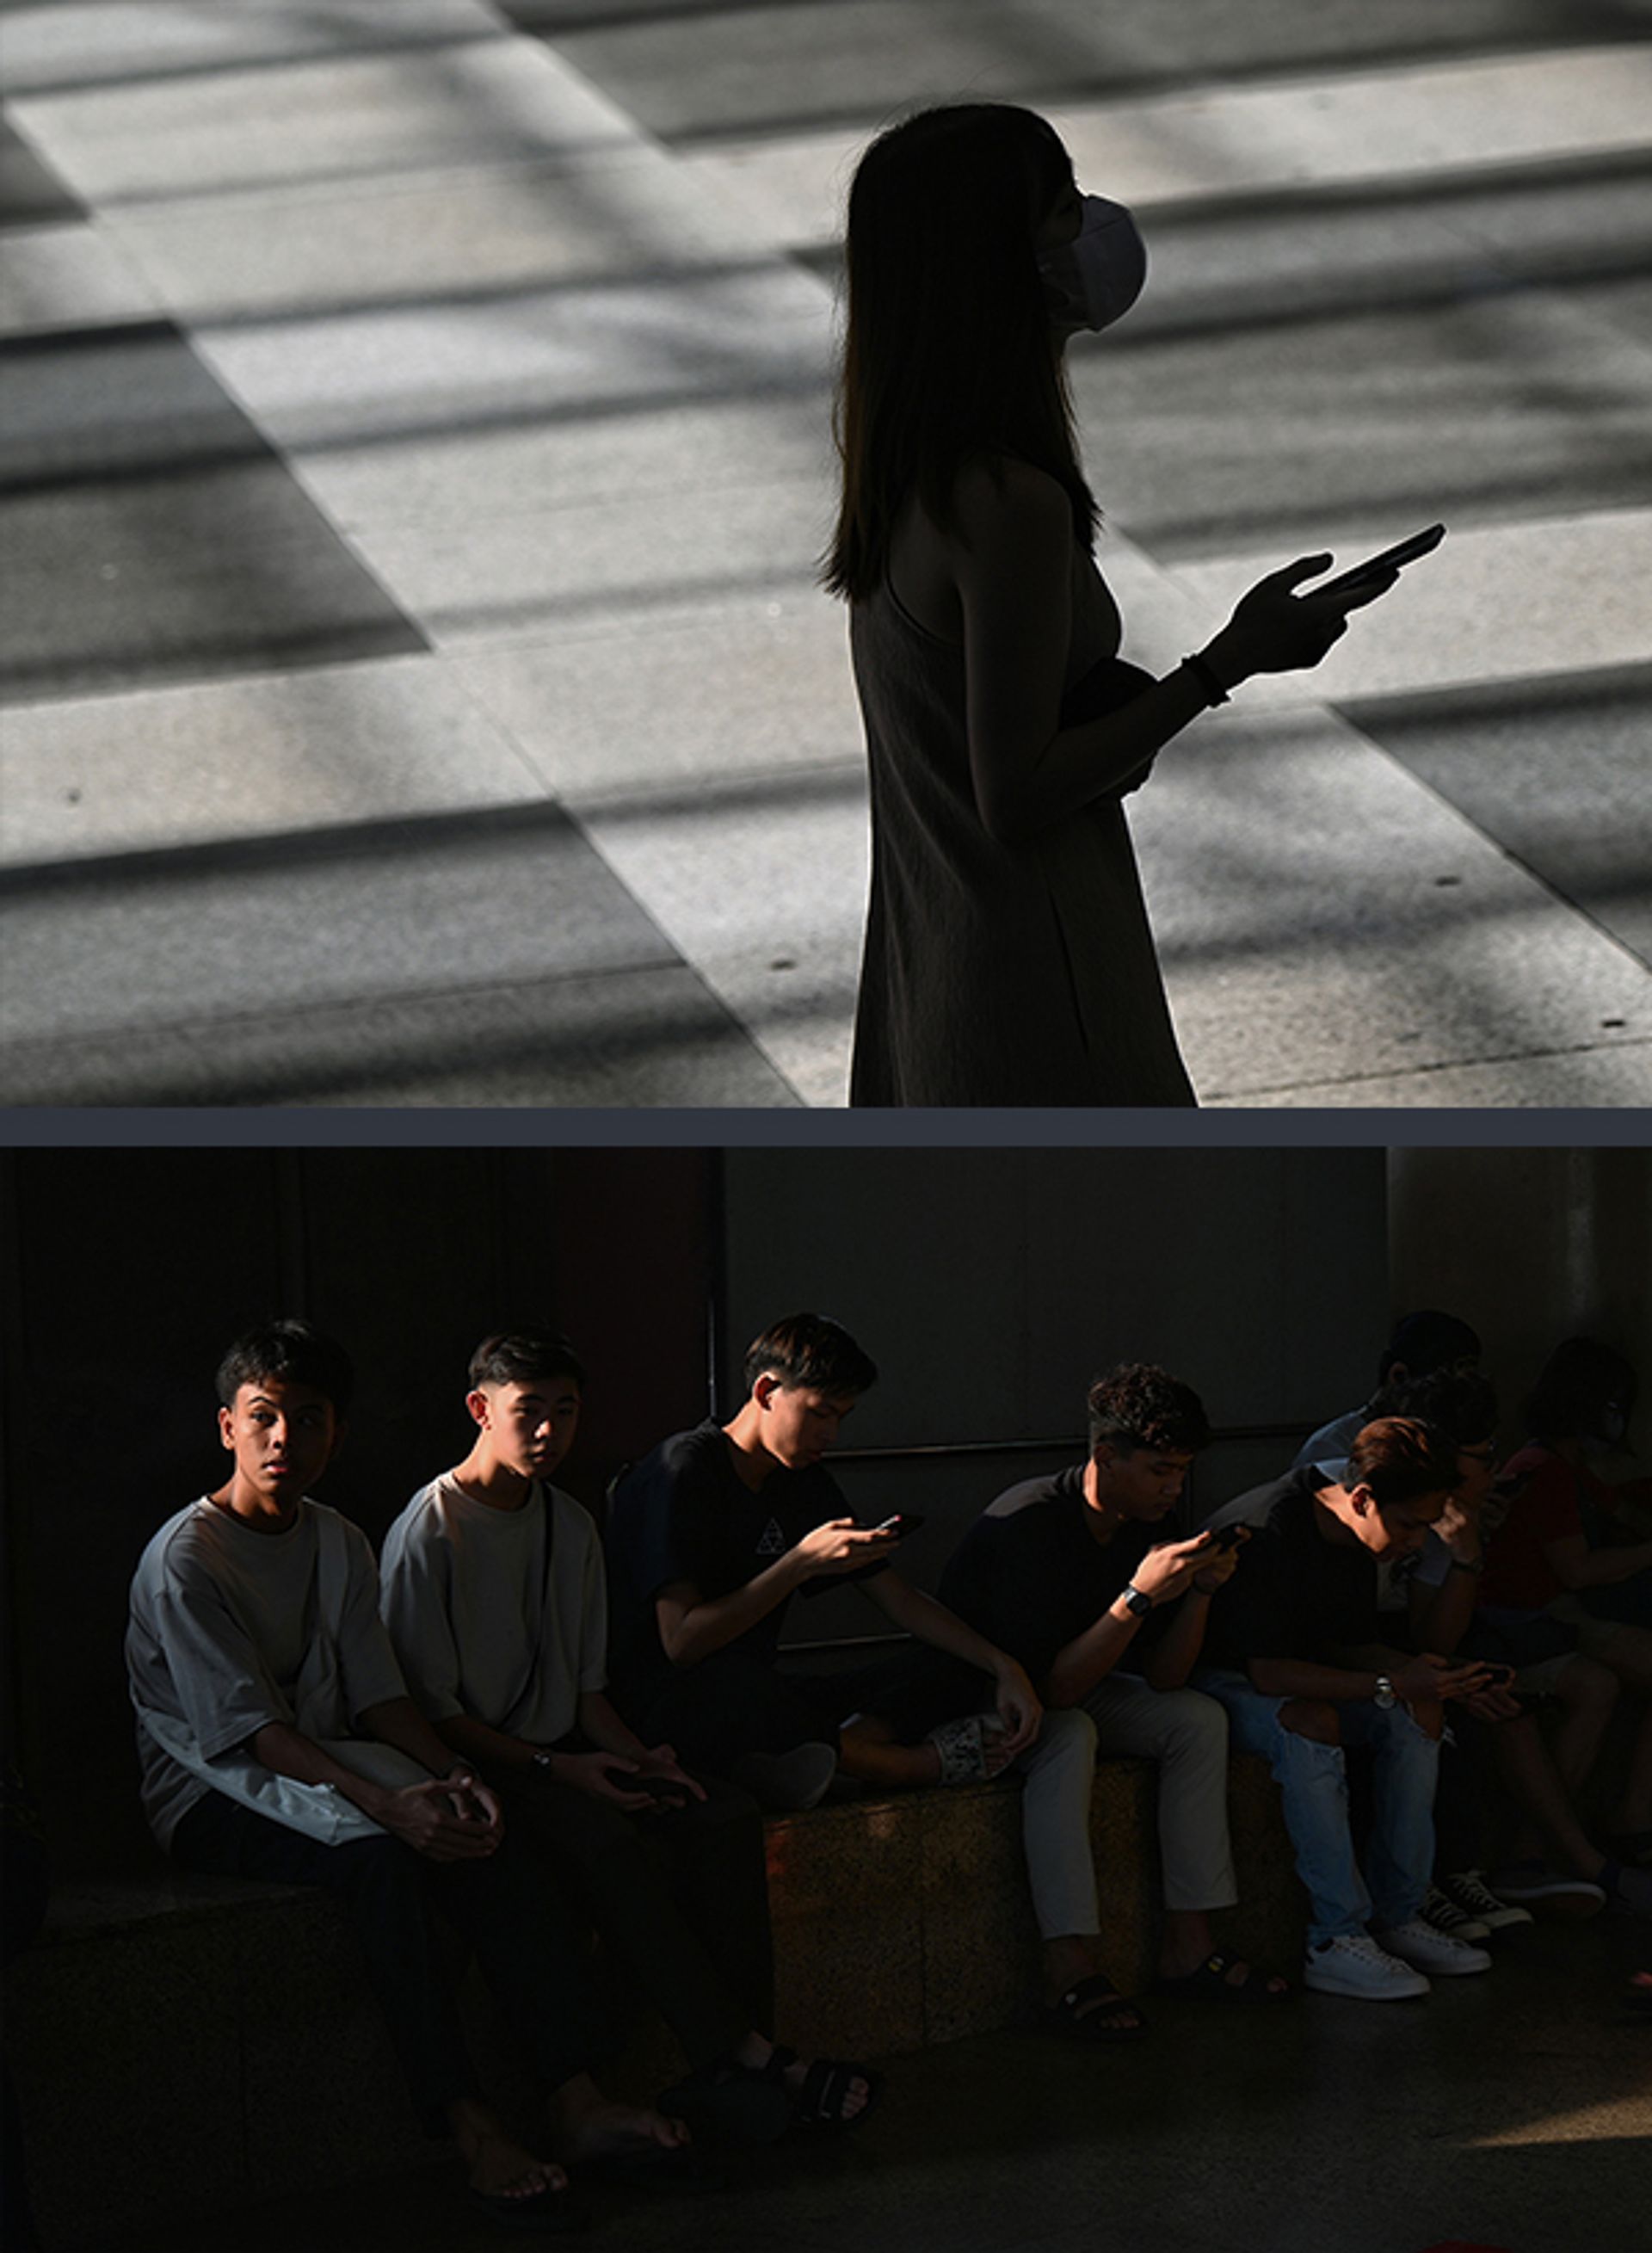 Mobile phones - our virtual shadow, with us wherever we go. Photos taken at UOB Plaza on Aug 22, 2022, and outside Jurong East MRT Station on April 15, 2023. ST PHOTOS: KUA CHEE SIONG & SHINTARO TAY